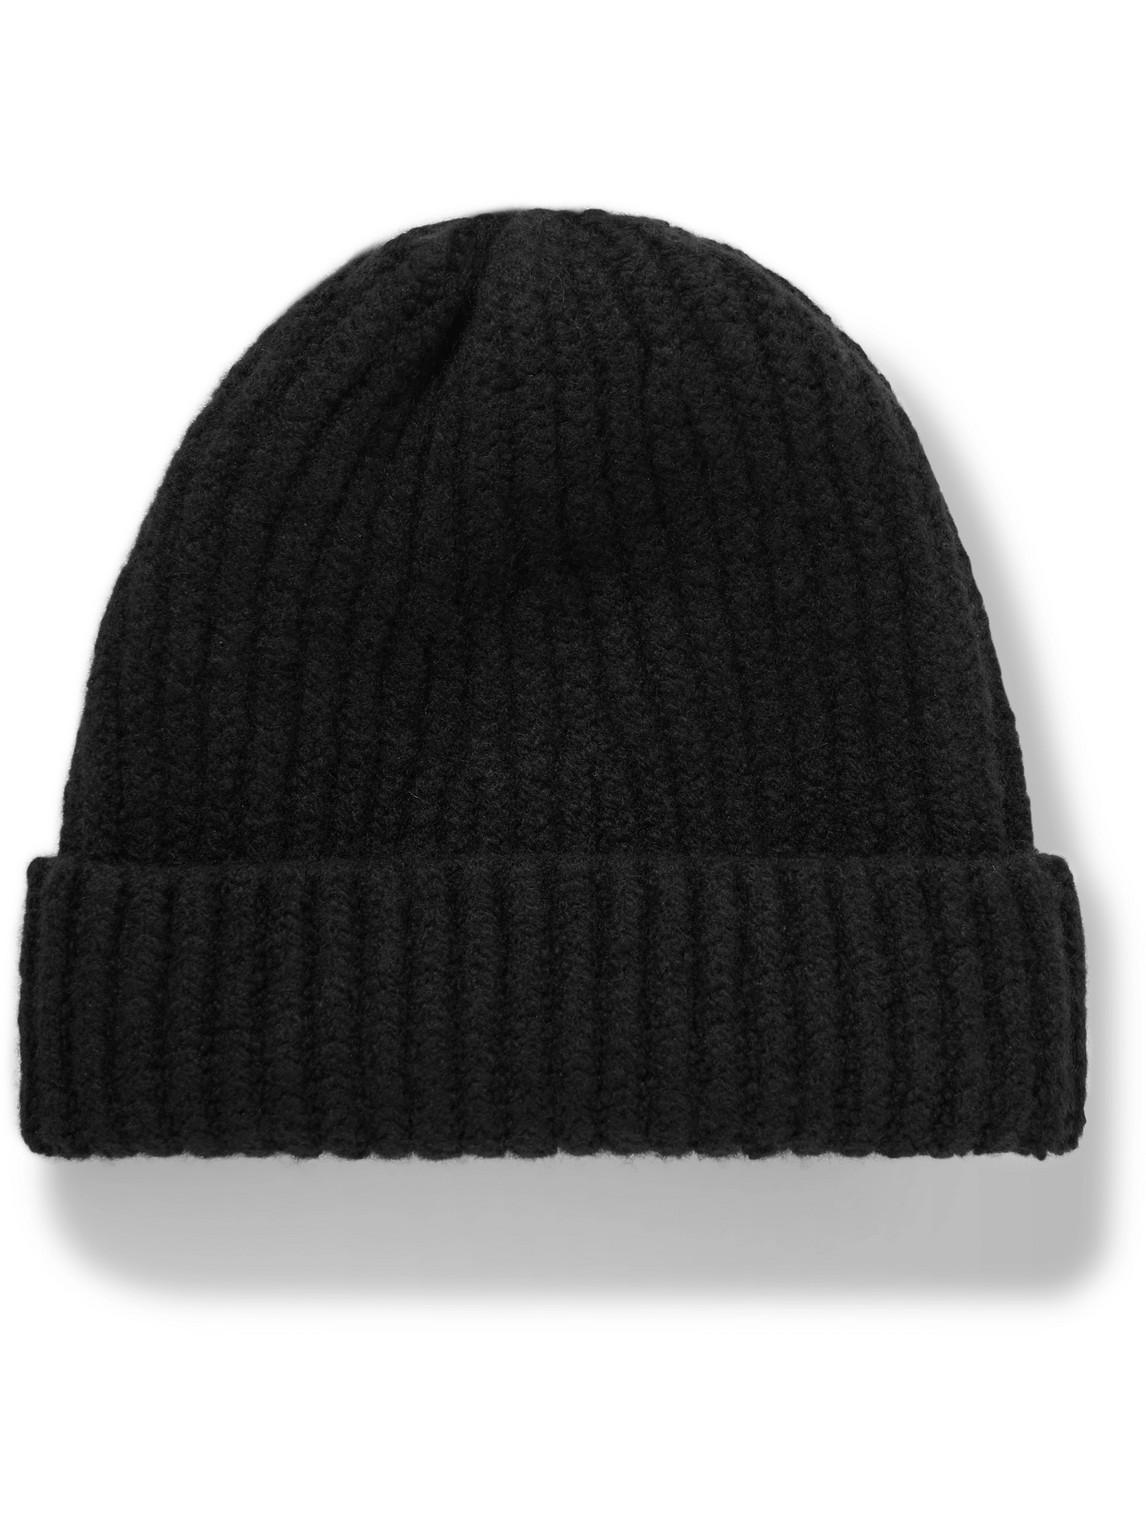 Inis Meáin - Ribbed Merino Wool and Cashmere-Blend Beanie - Men - Black von Inis Meáin